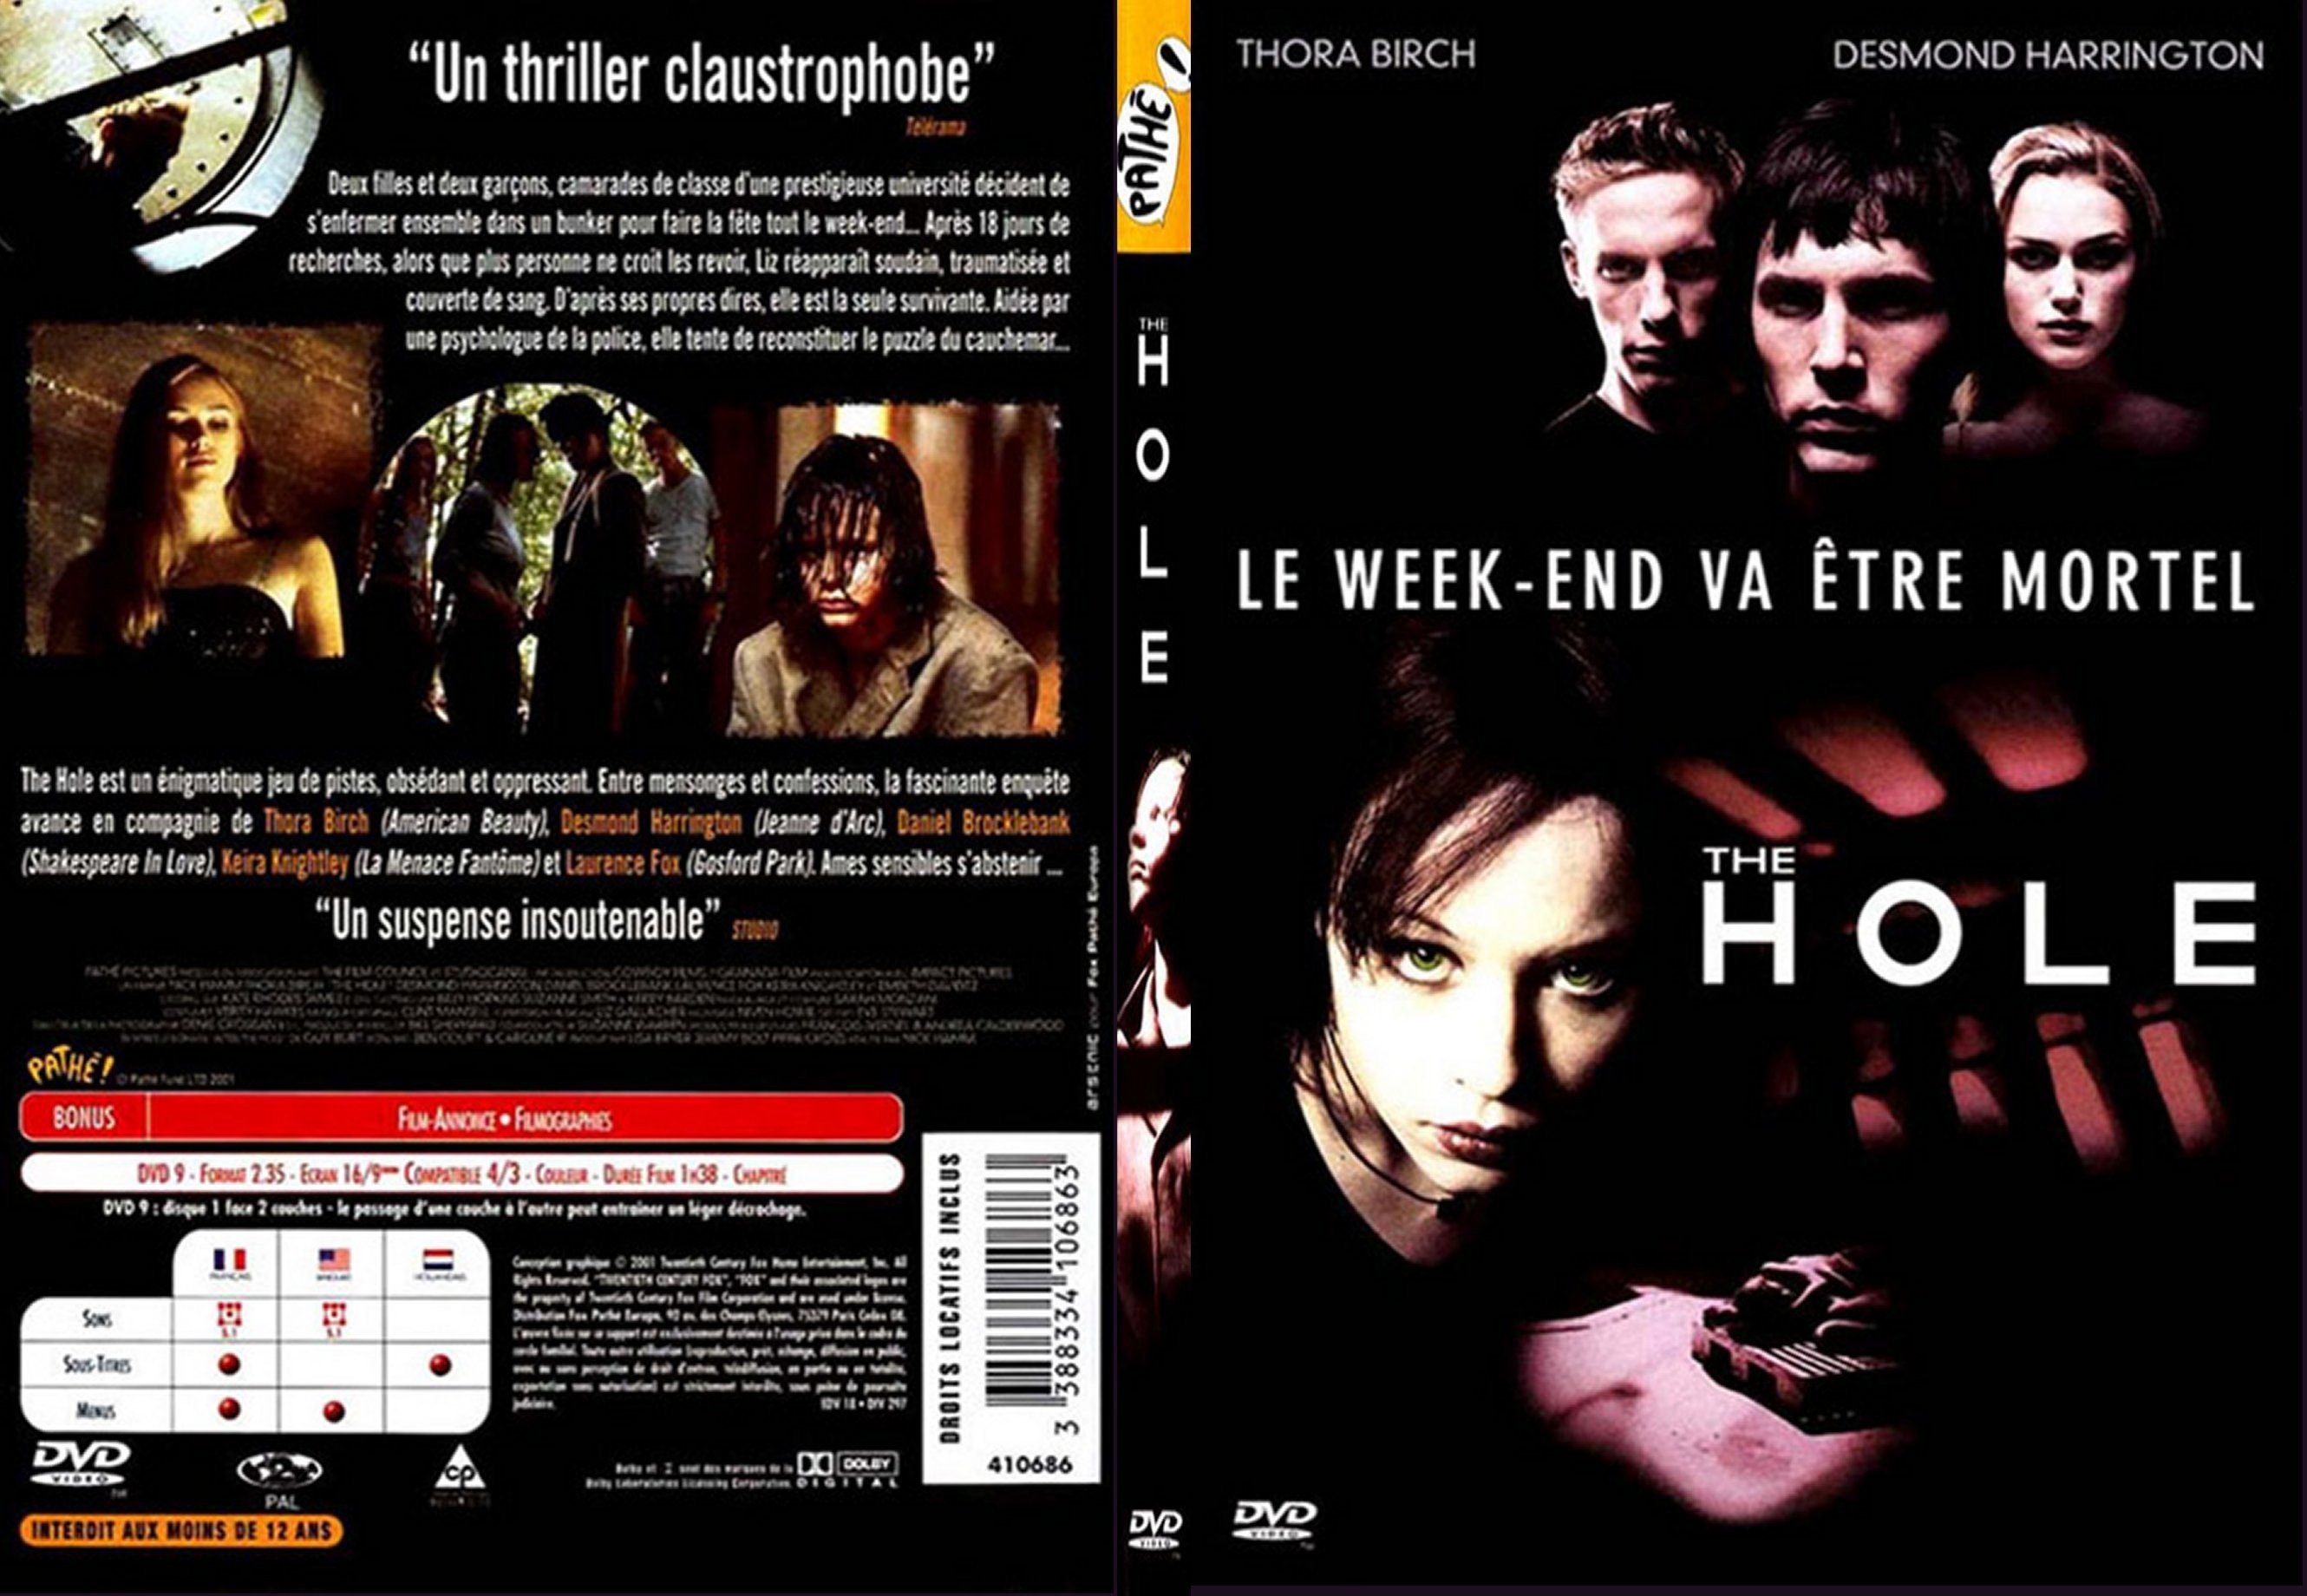 Jaquette DVD The hole - SLIM